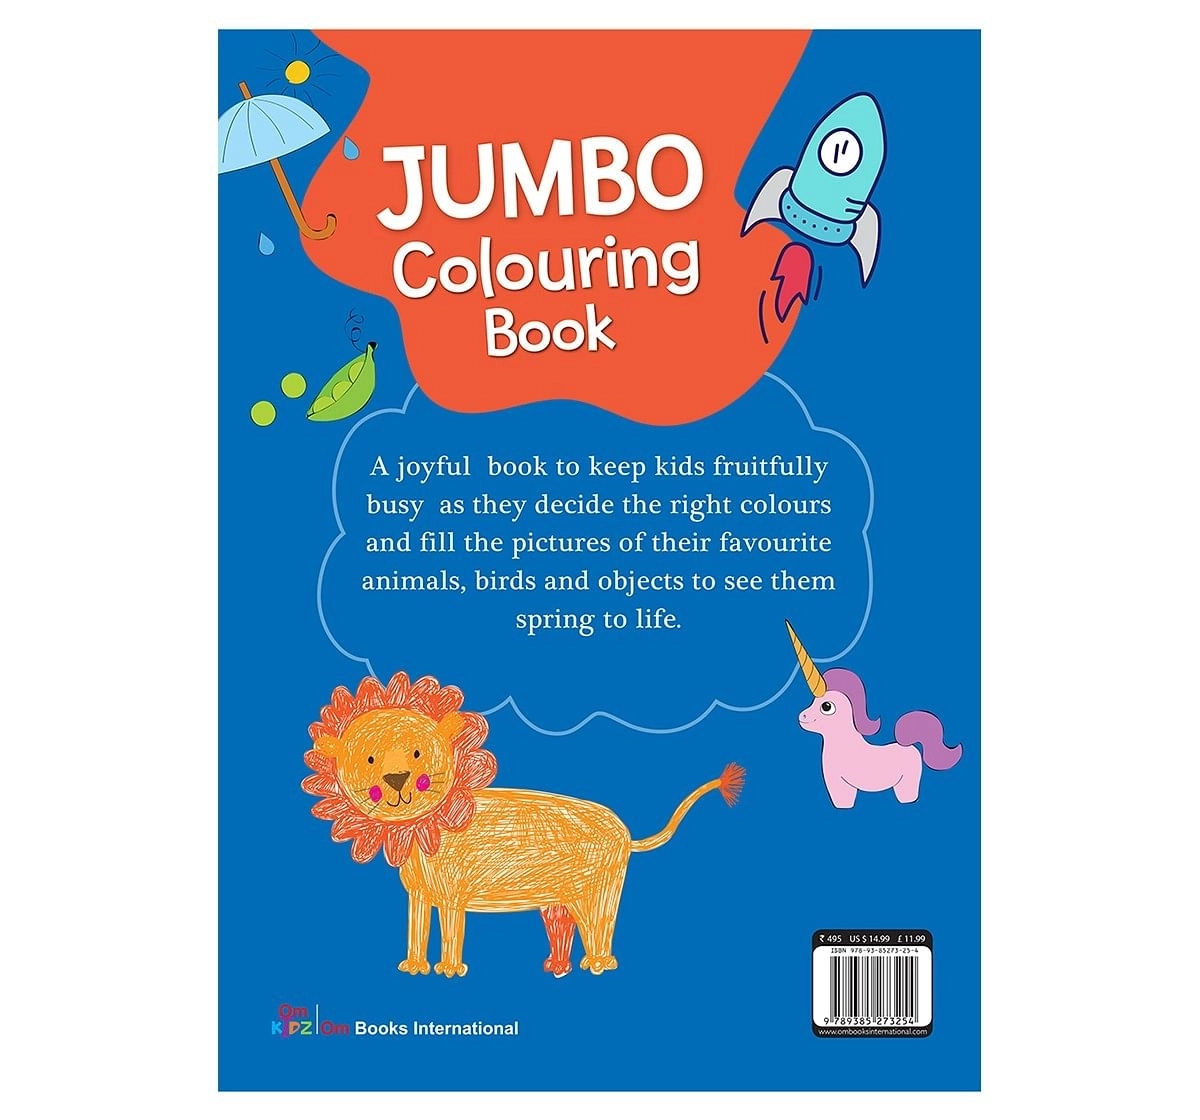 Colouring Book : Jumbo Colouring Book For Kids, 368 Pages Book By Om Books Editorial Team, Paperback